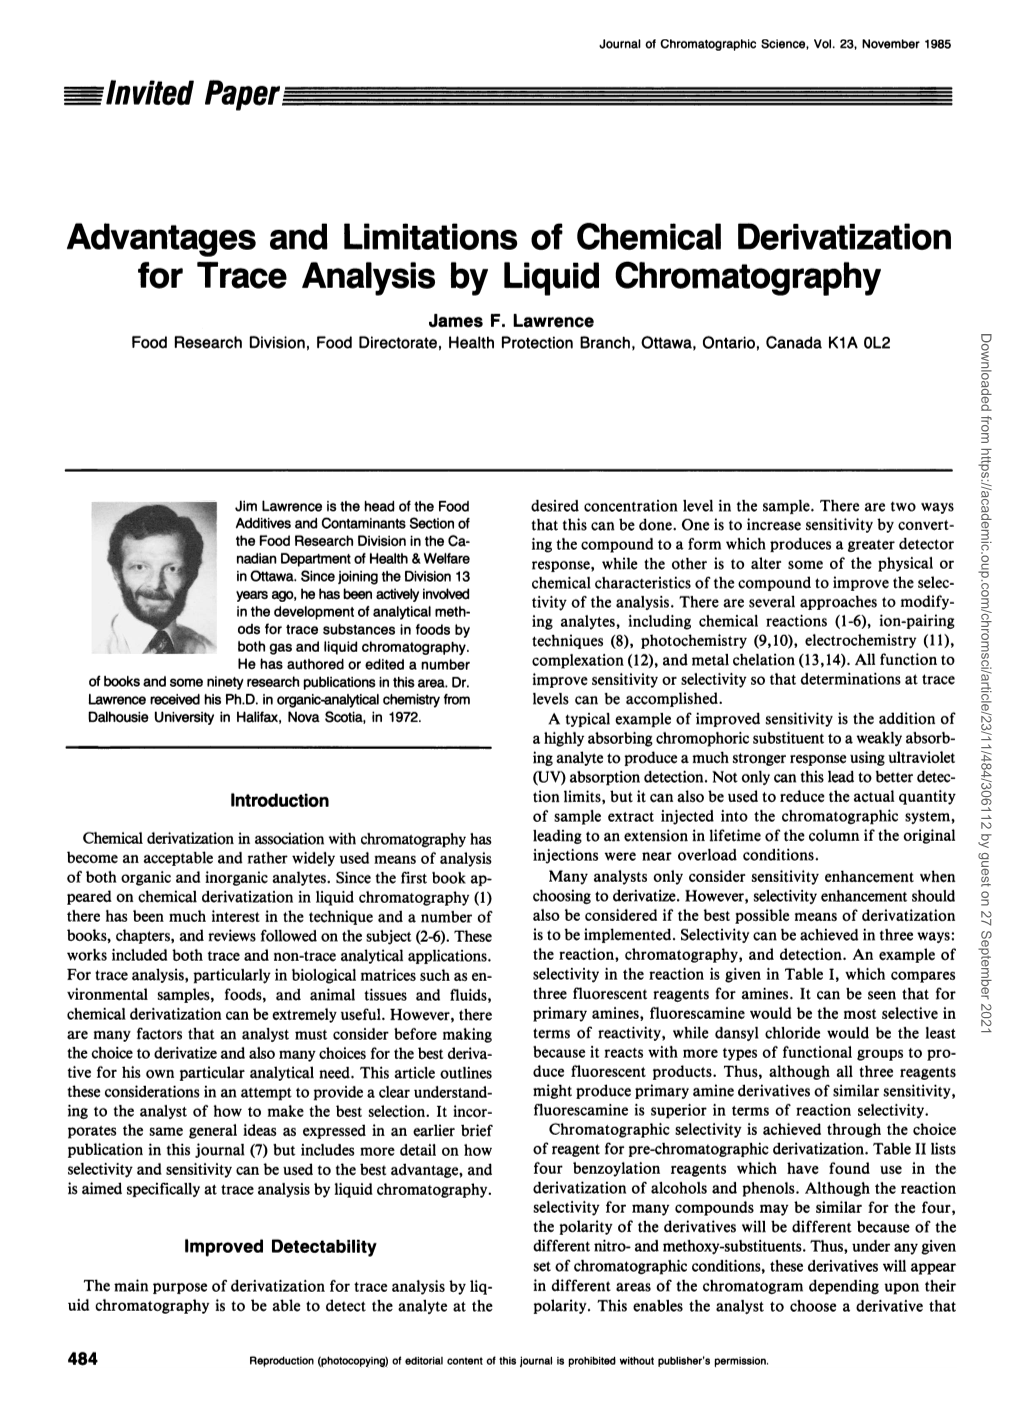 Advantages and Limitations of Chemical Derivatization for Trace Analysis by Liquid Chromatography